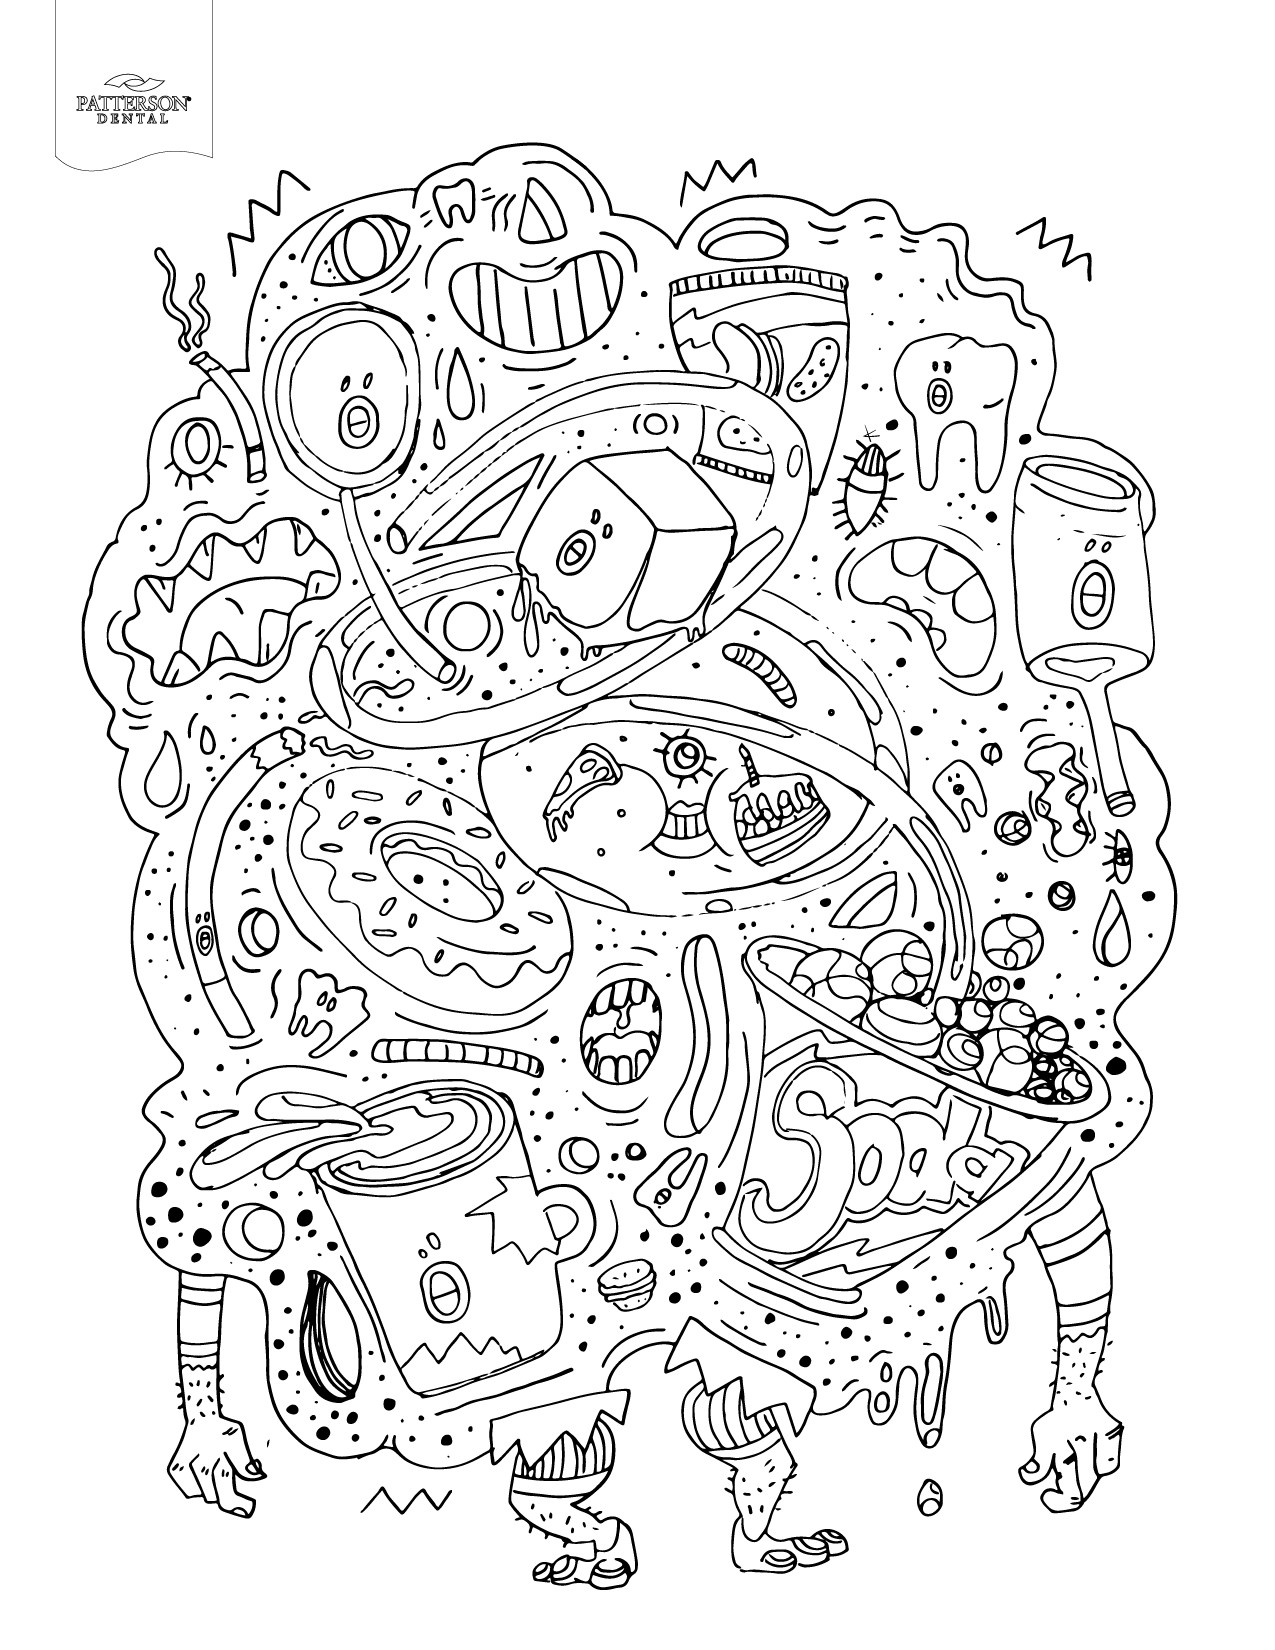 Food Coloring Pages For Adults
 10 Toothy Adult Coloring Pages [Printable] f The Cusp